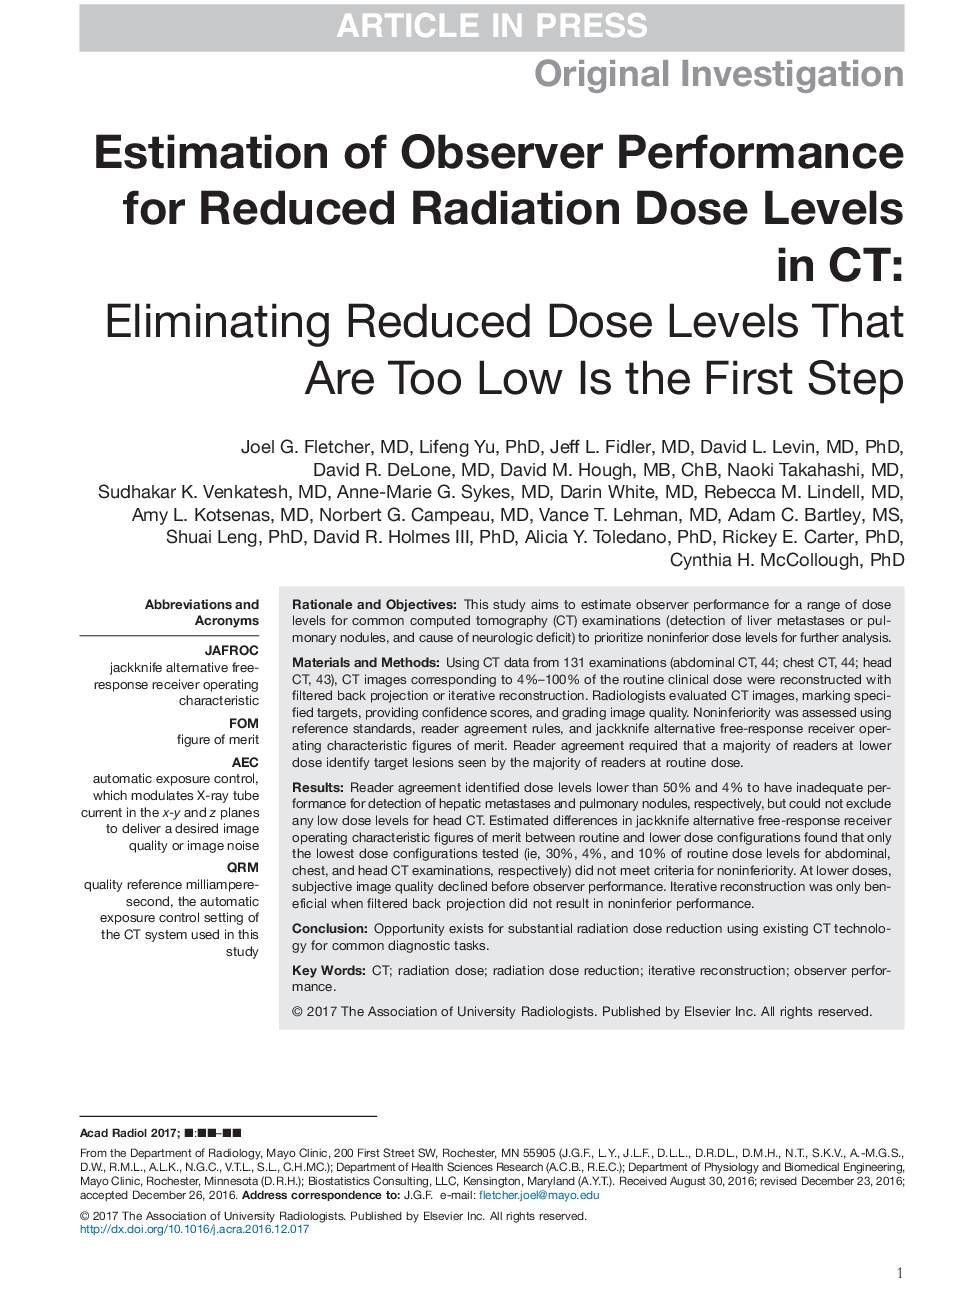 Estimation of Observer Performance for Reduced Radiation Dose Levels in CT